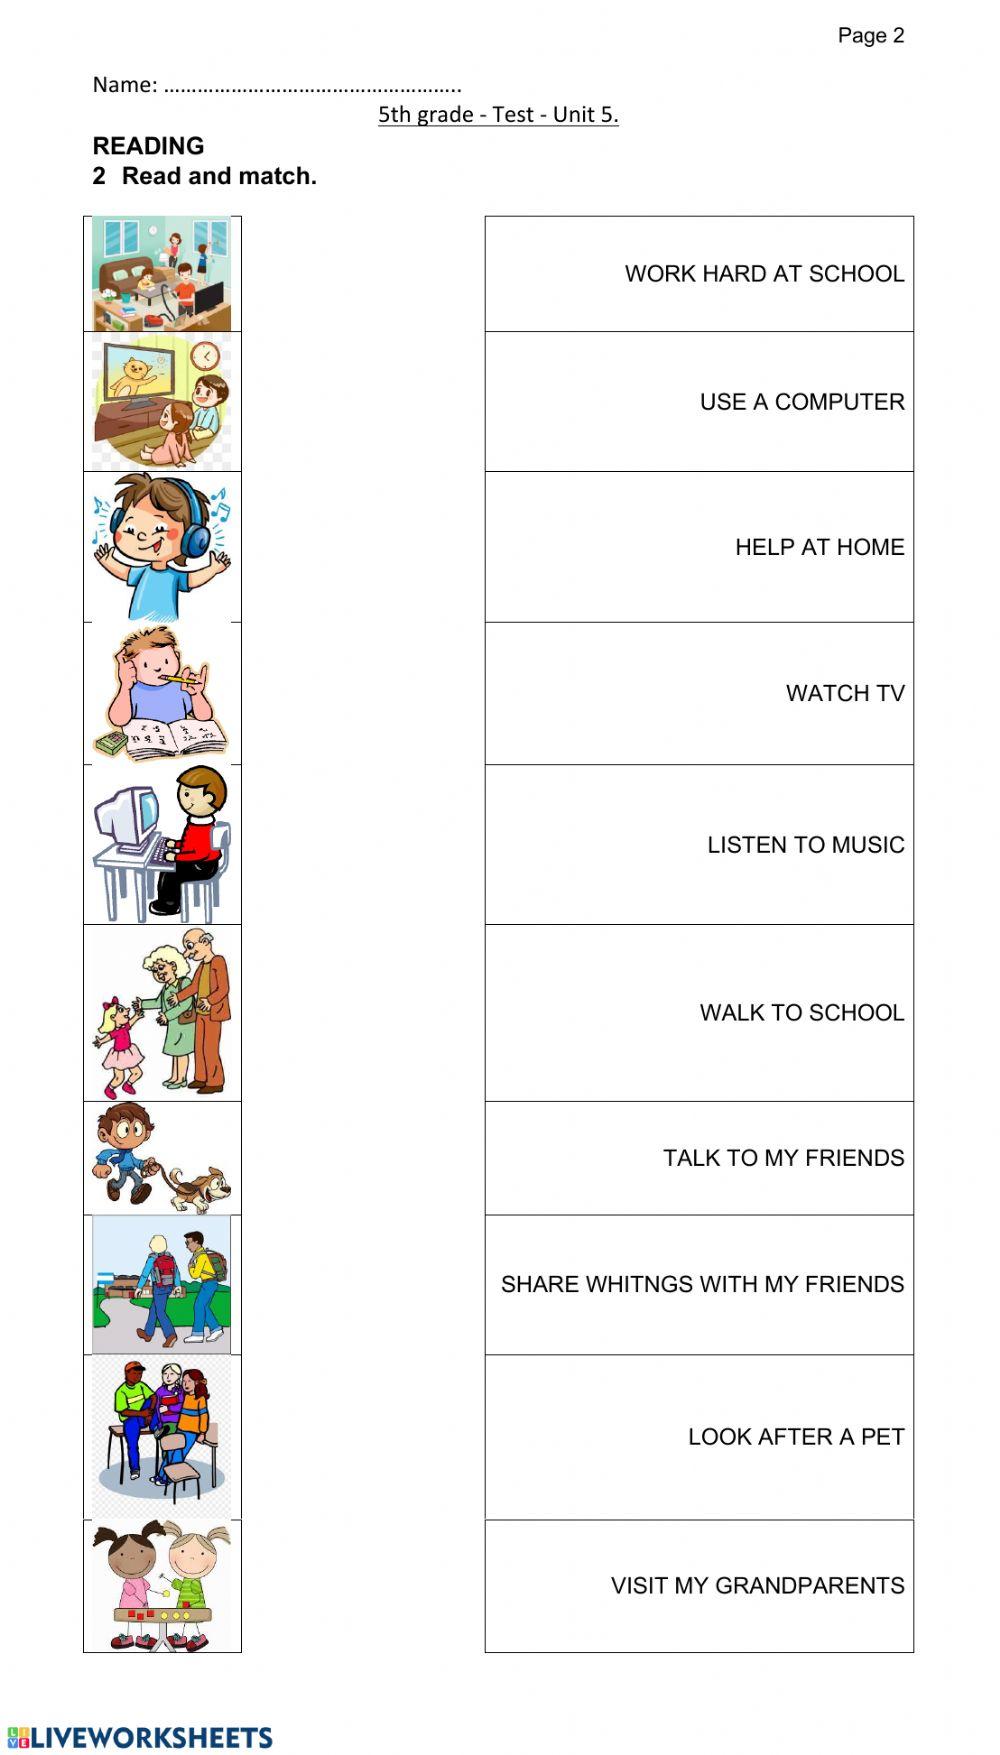 Test 5th grade - daily activities